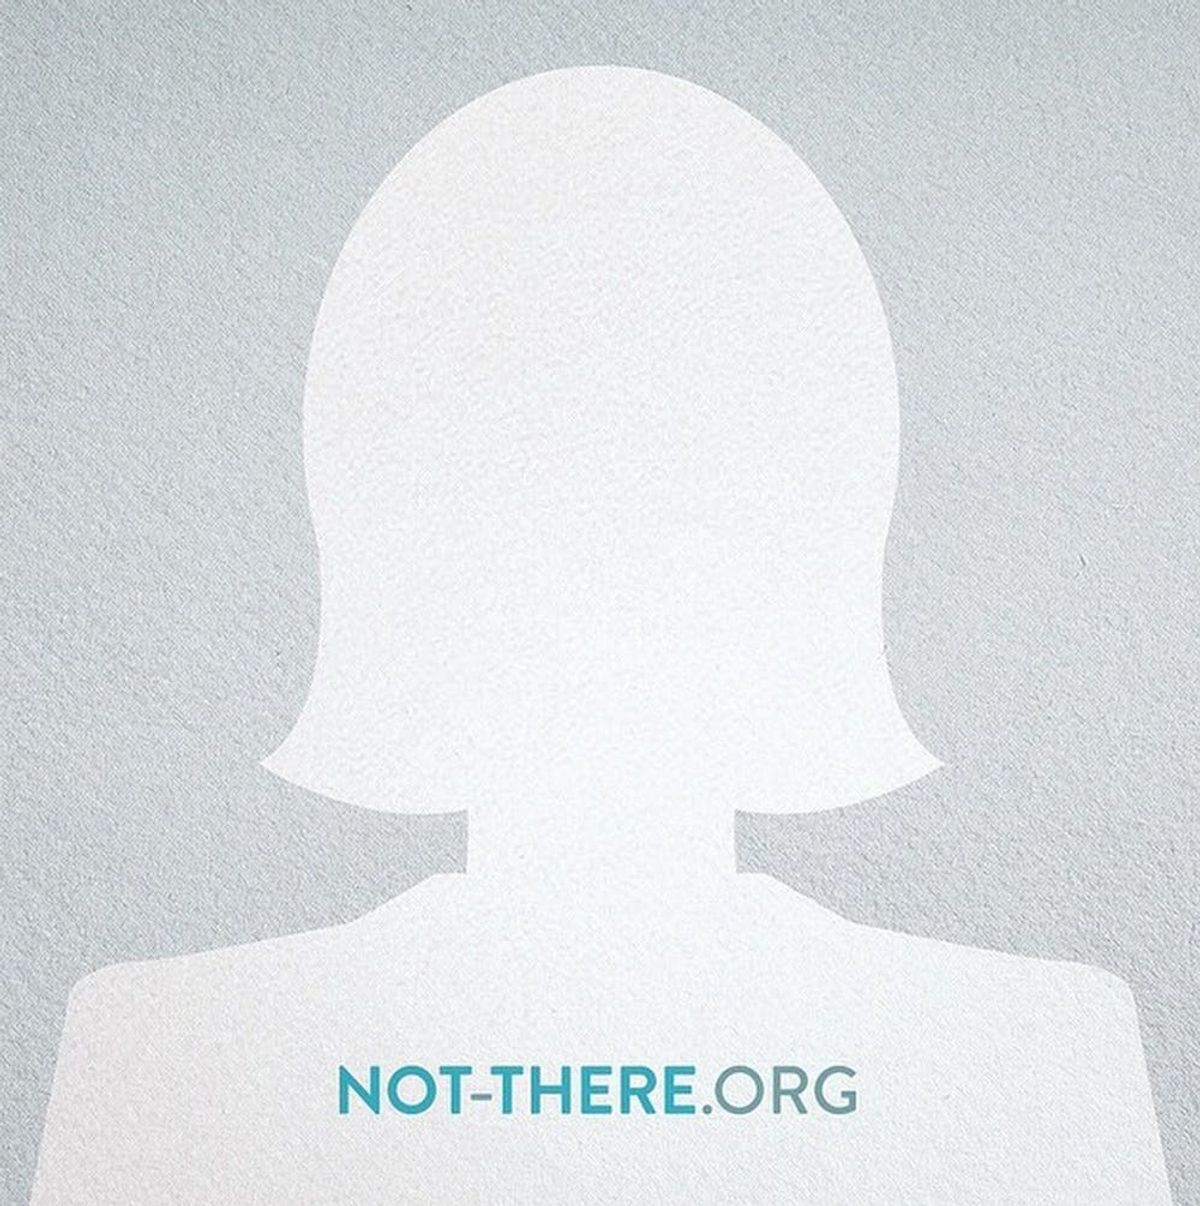 5 Things You Need to Know About #NotThere and #NoCeilings